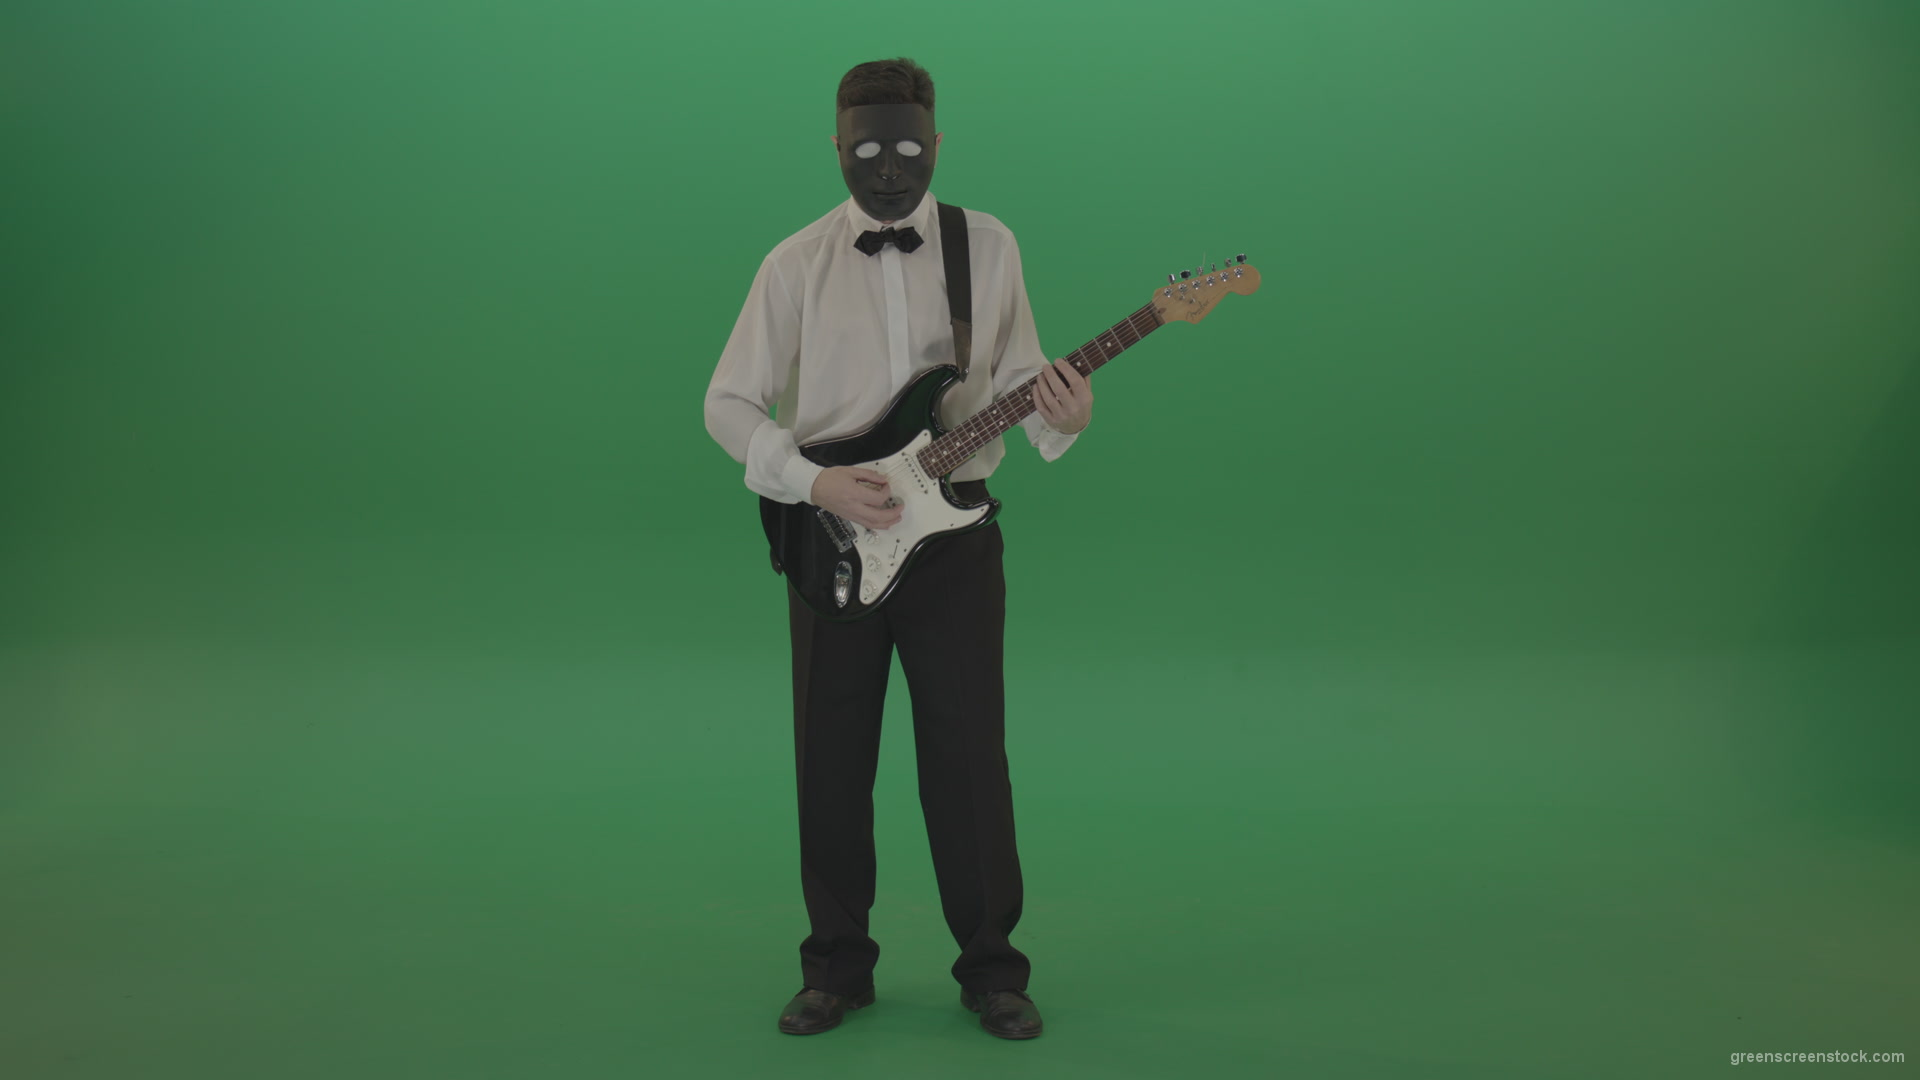 Classic-guitarist-in-white-shirt-play-guitar-in-mask-isolated-on-green-screen_001 Green Screen Stock